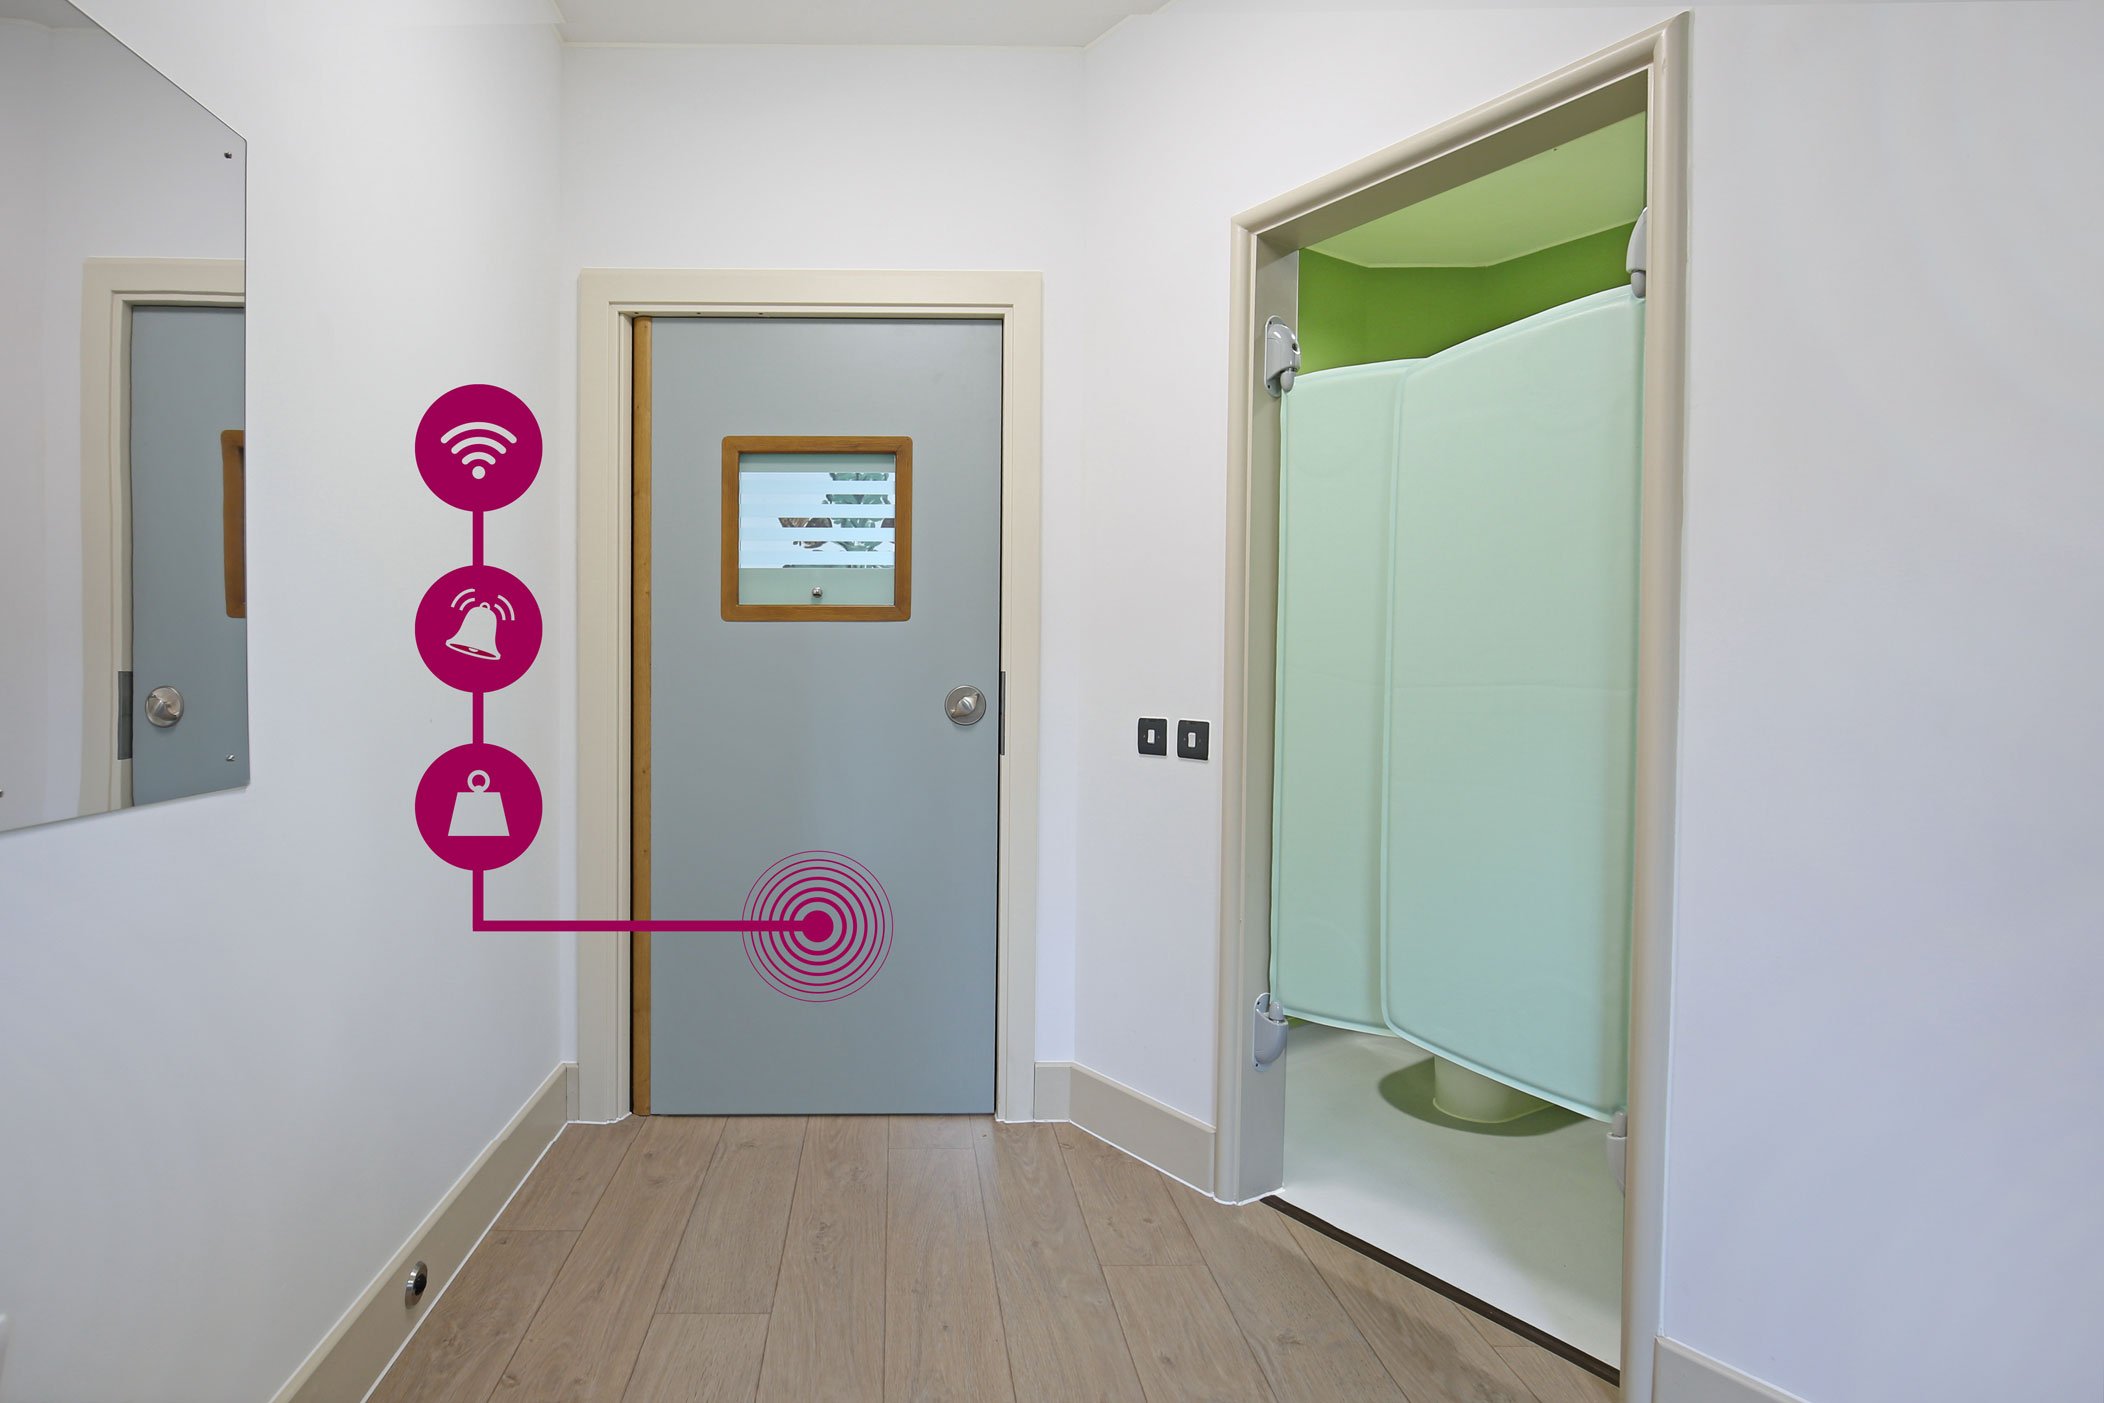 FULL-DOOR DETECTION FOR PATIENT SAFETY